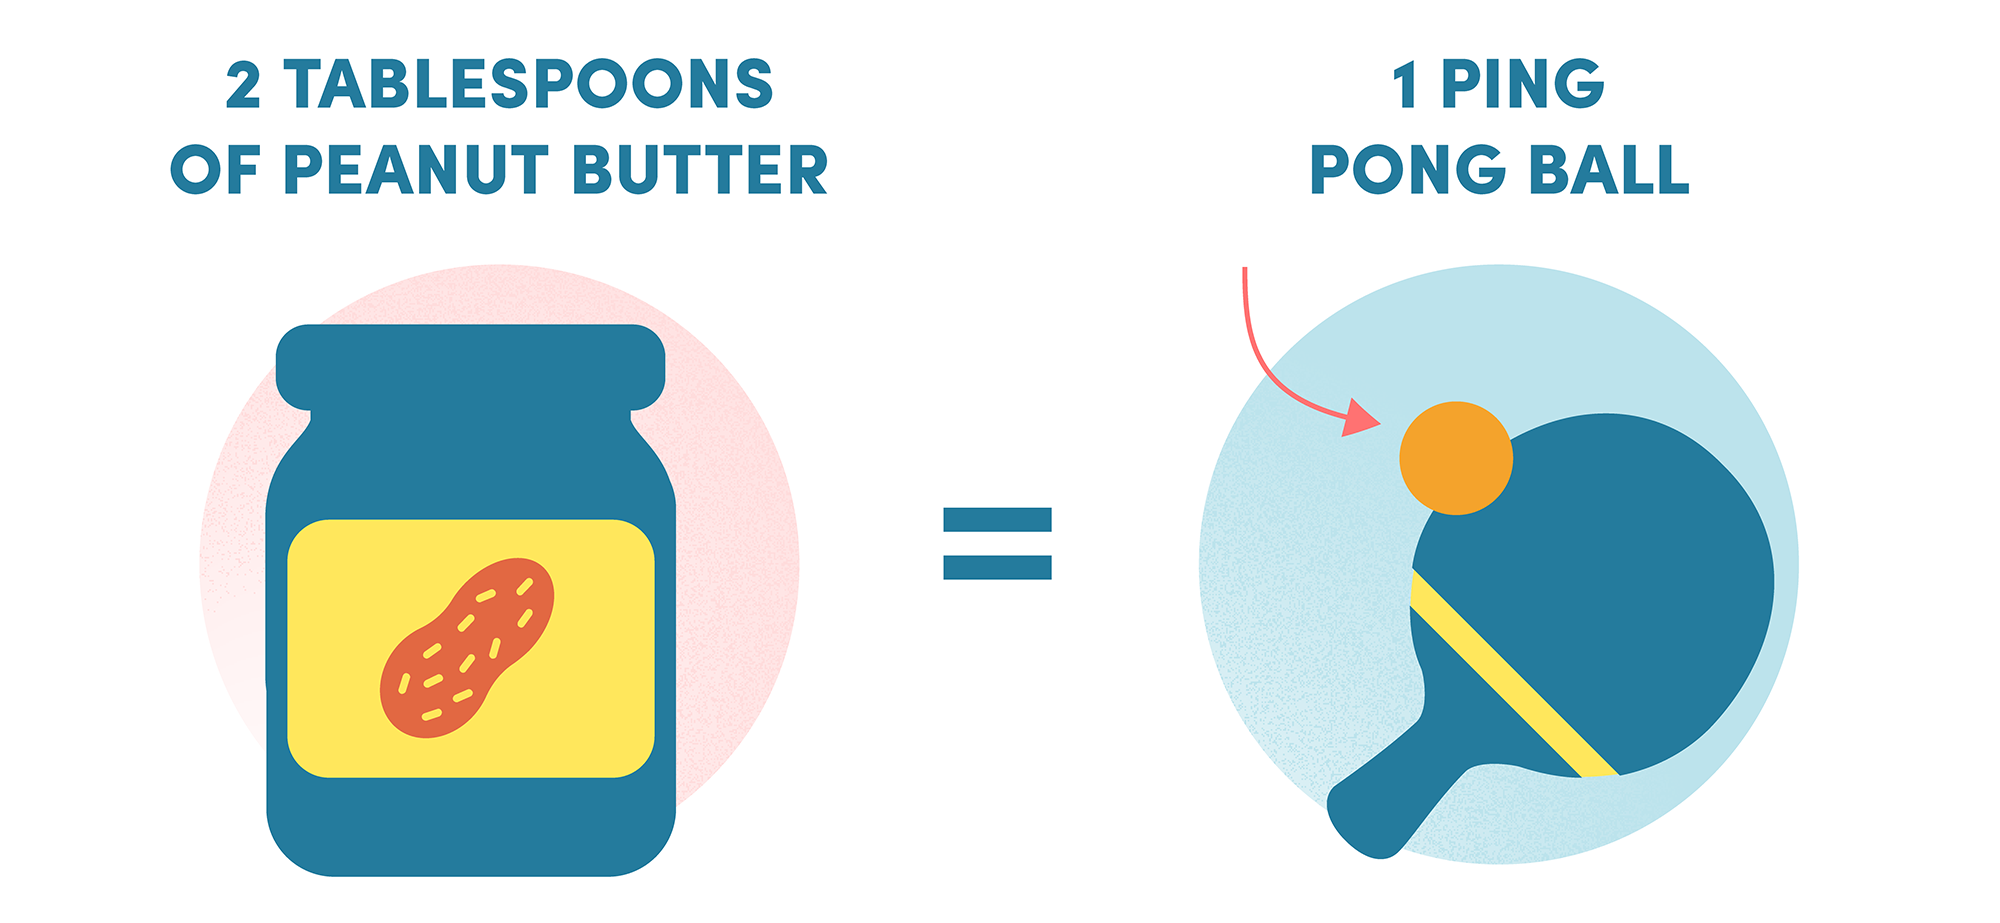 2 Tablespoons Of Peanut Butter = A Ping Pong Ball